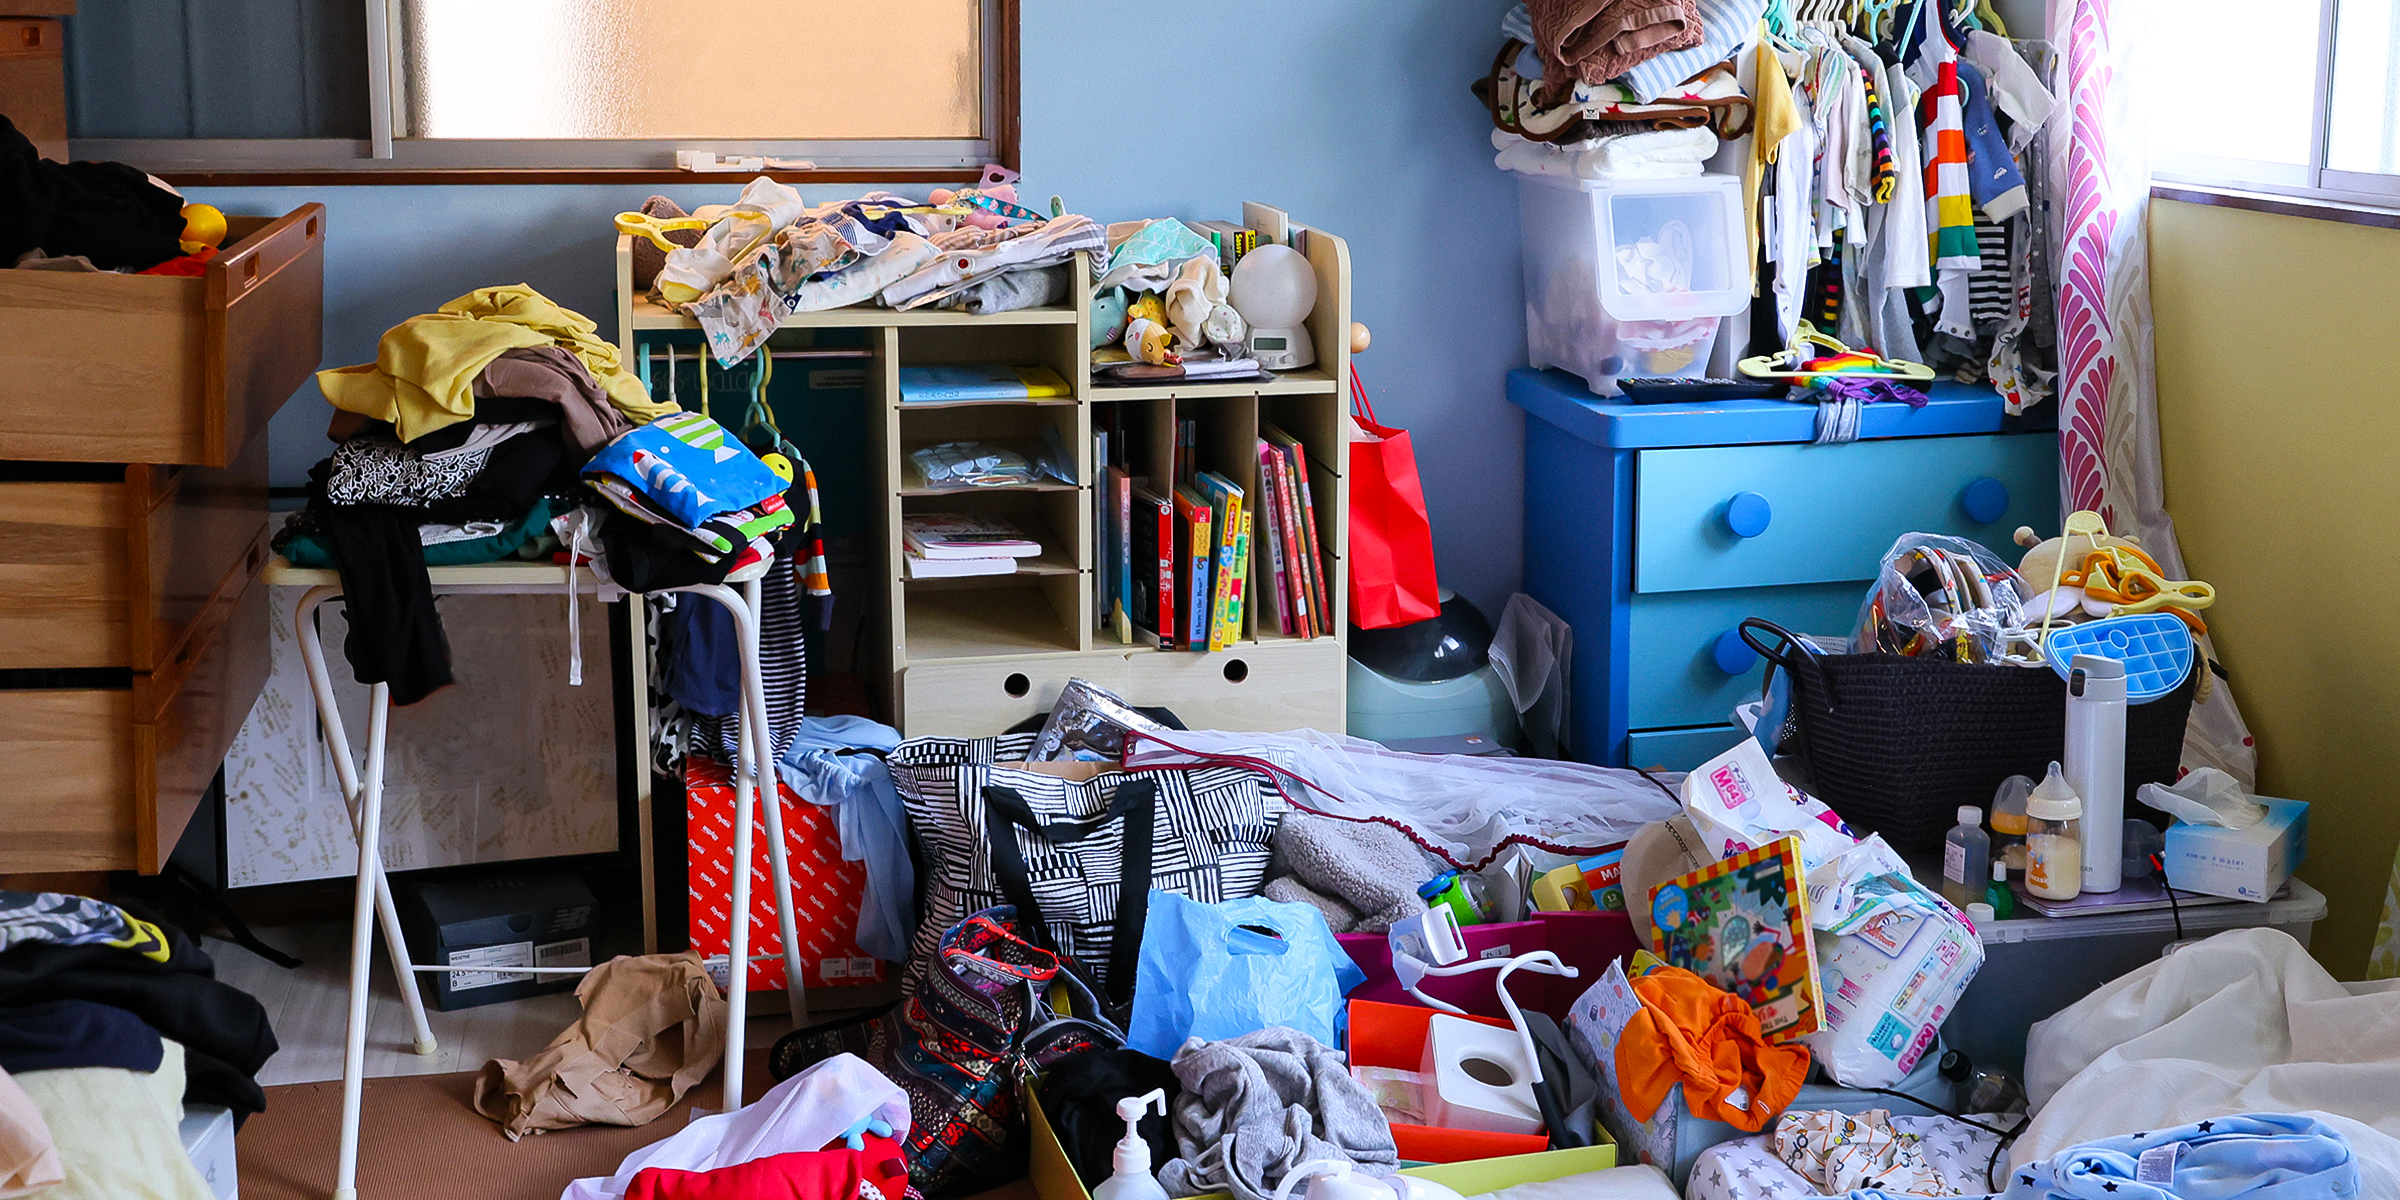 A messy home | Source: Shutterstock